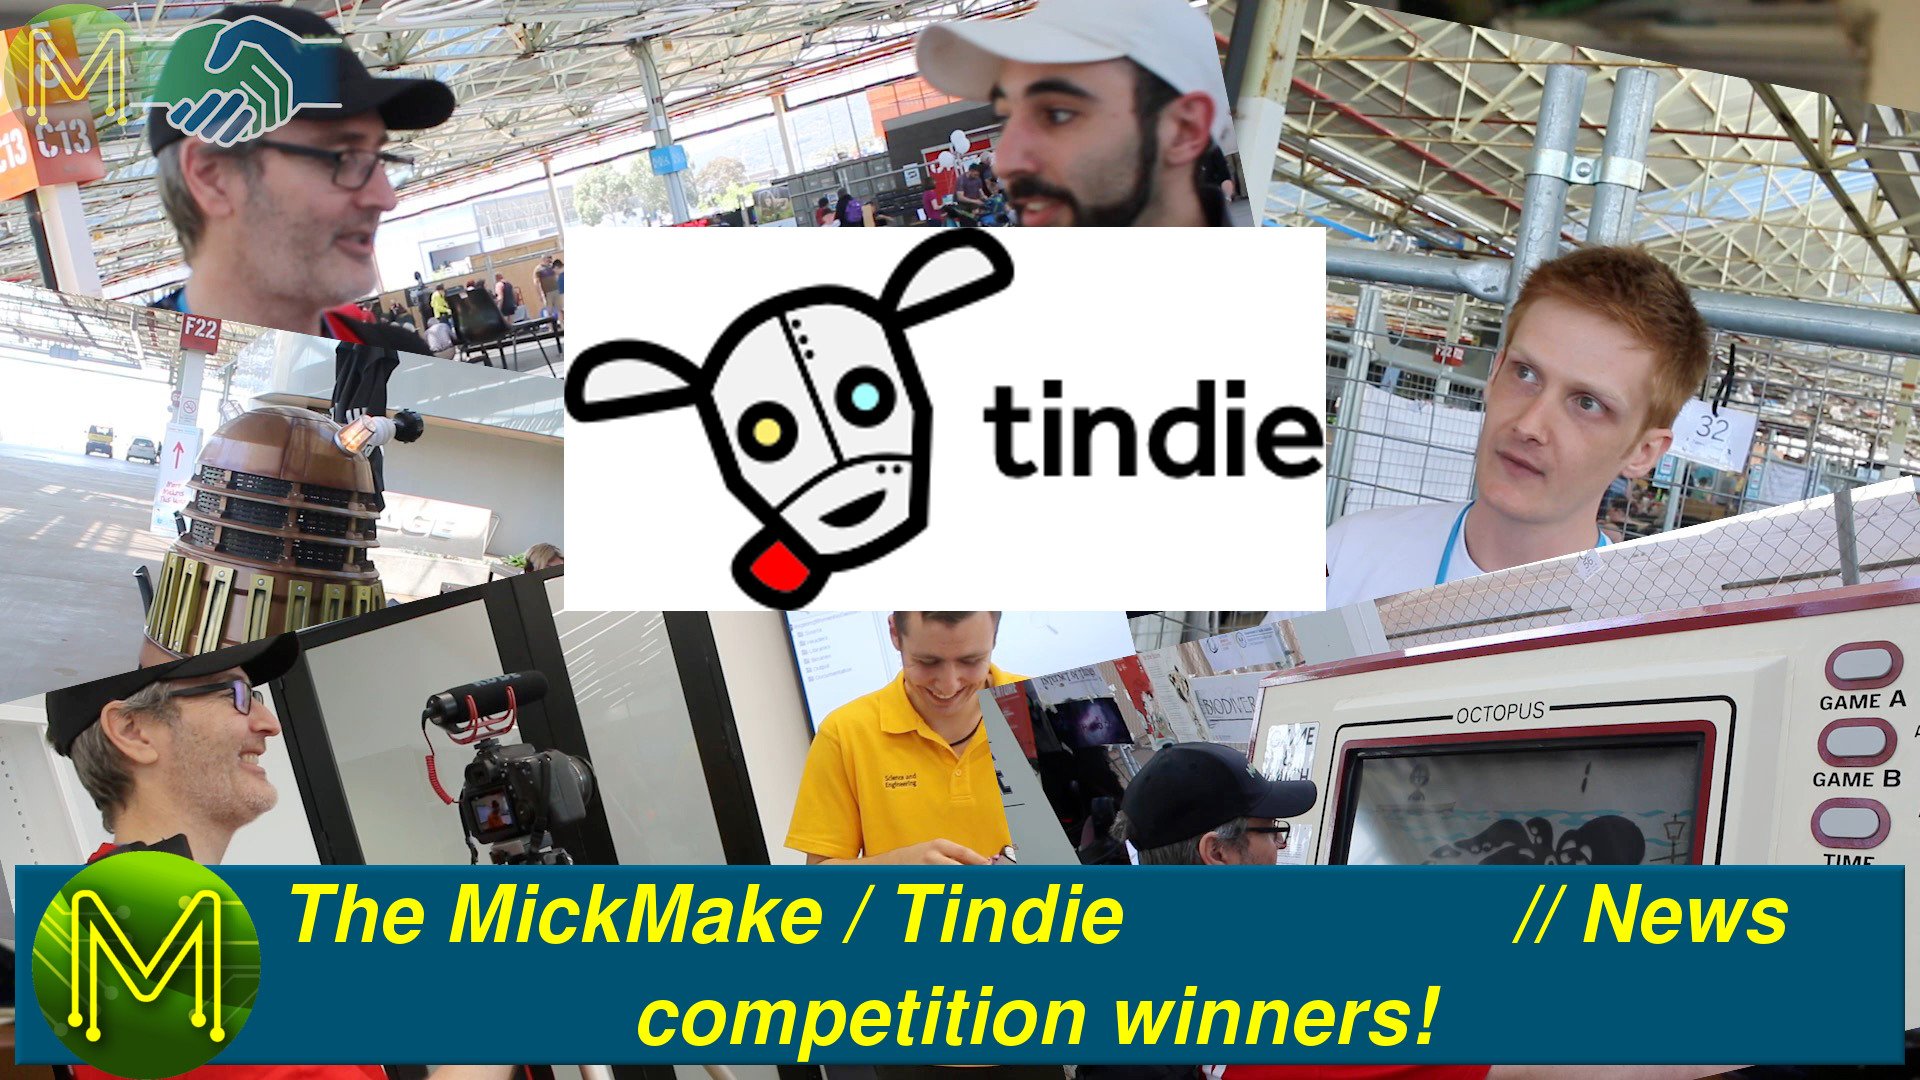 The winners of the MickMake/Tindie competition